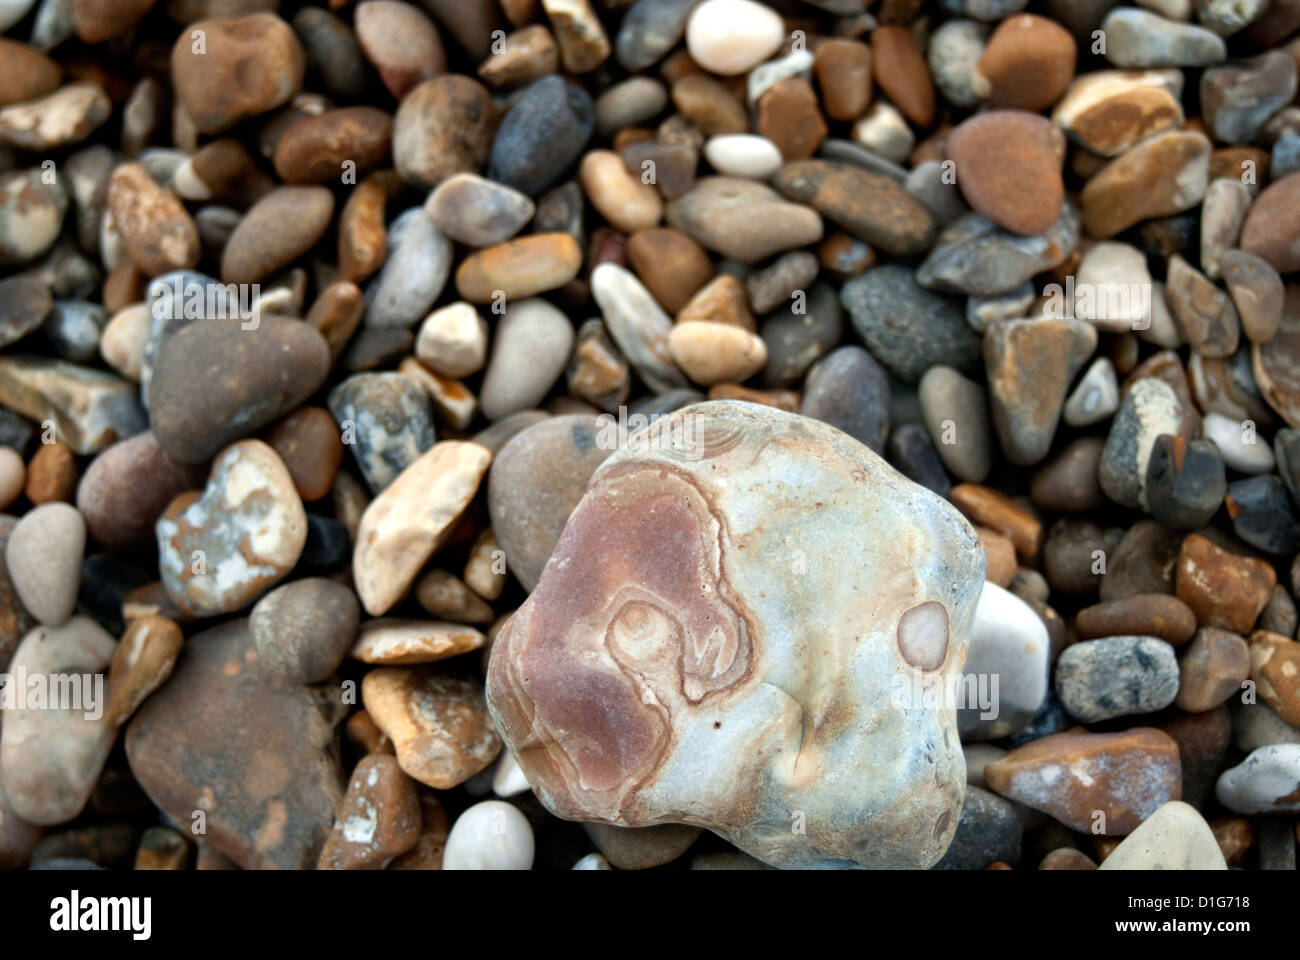 pebbles on a beach with one larger pebble in the foreground Stock Photo